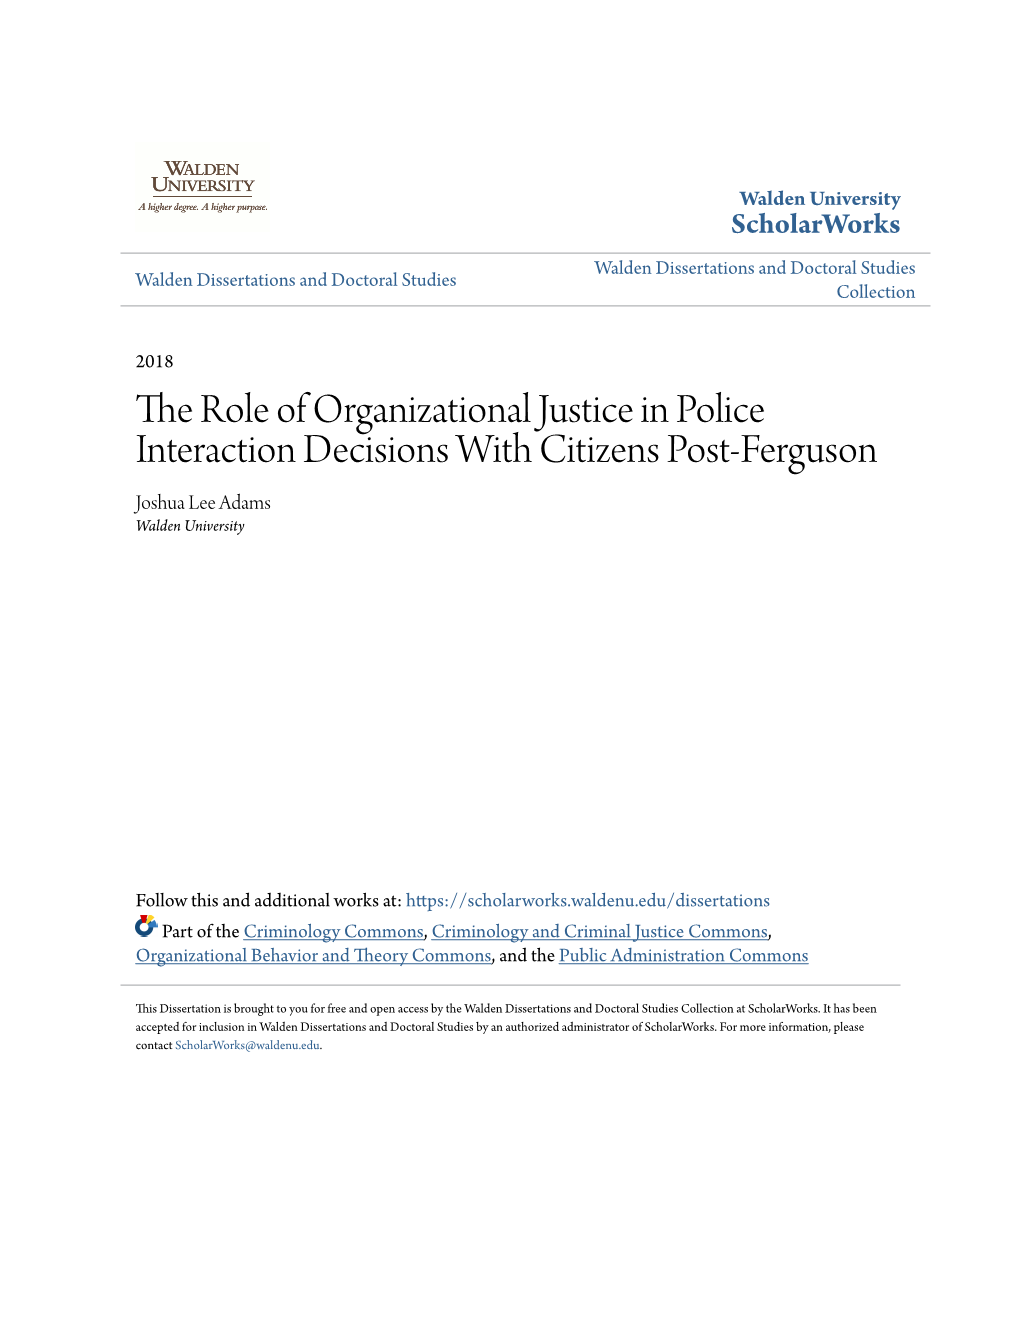 The Role of Organizational Justice in Police Interaction Decisions with Citizens Post-Ferguson Joshua Lee Adams Walden University